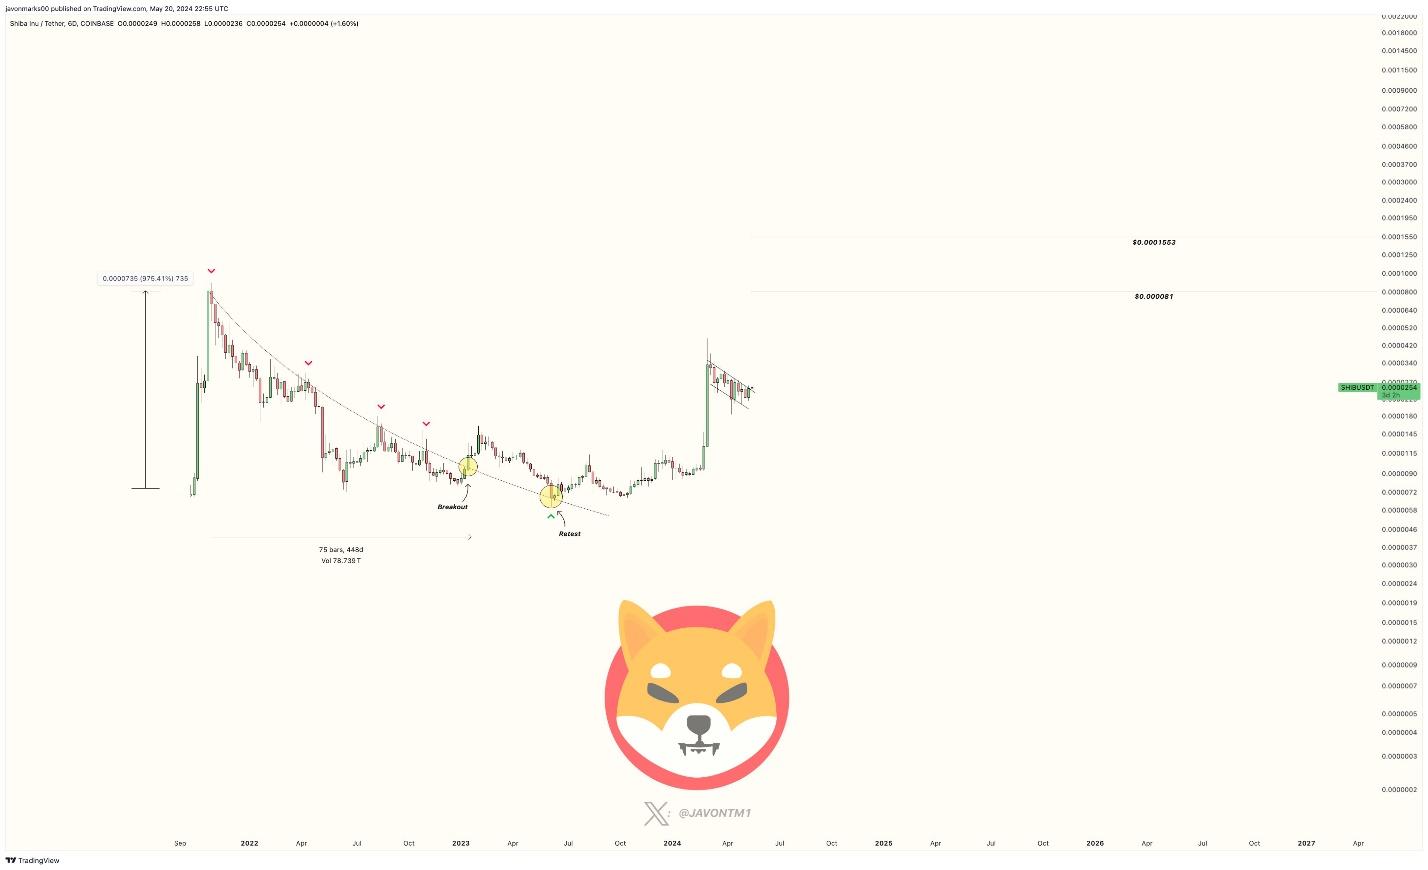 $0.0001 SHIB Price Projection Fueled By Shiba Inu’s Explosive Potential and Ecosystem Growth